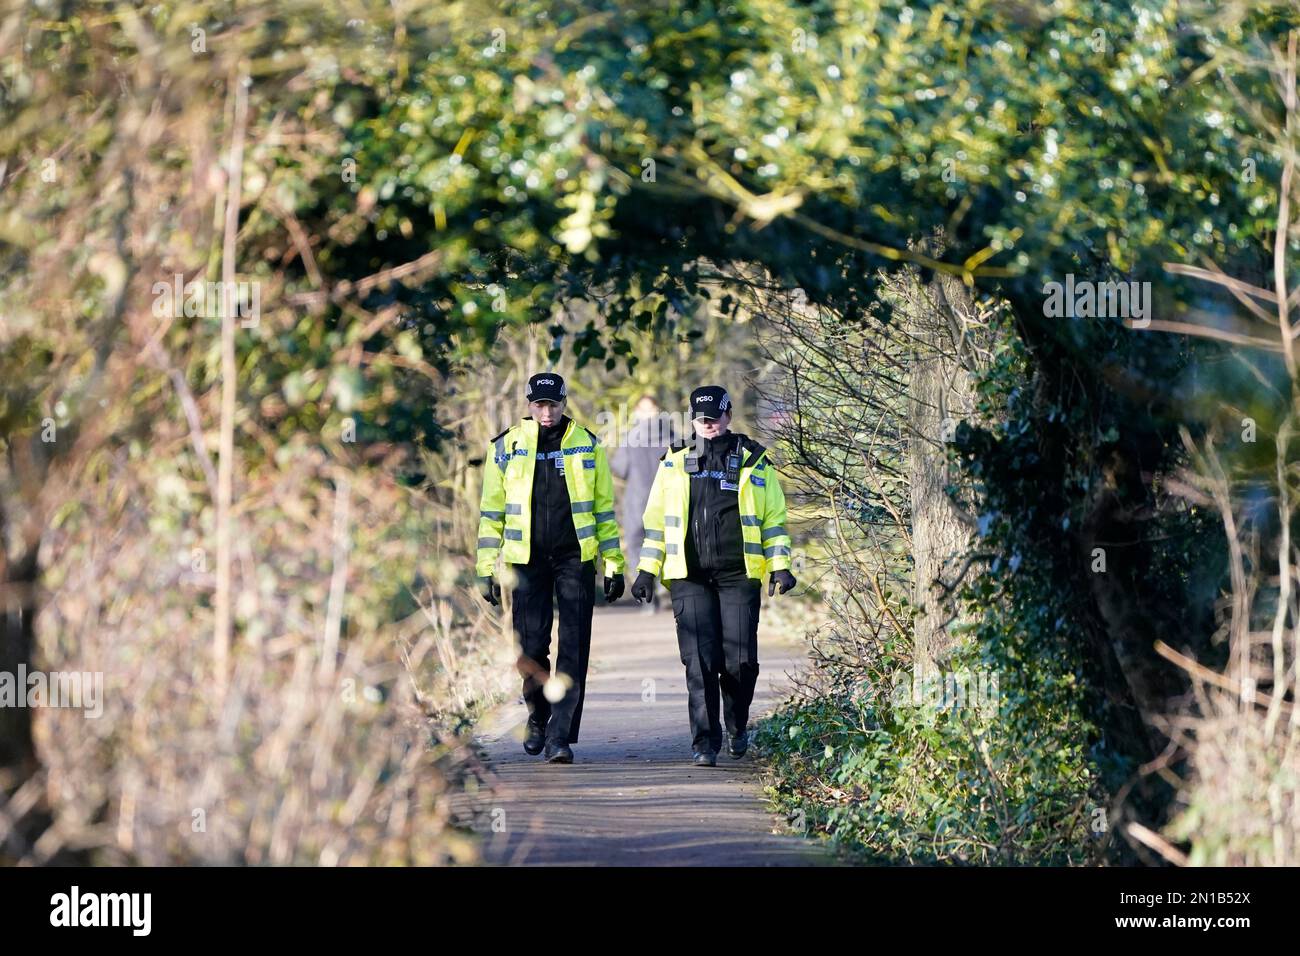 Police officers in St Michael's on Wyre, Lancashire, continue their search for missing woman Nicola Bulley, 45, who was last seen on the morning of Friday January 27, when she was spotted walking her dog on a footpath by the nearby River Wyre. Picture date: Monday February 6, 2023. Stock Photo